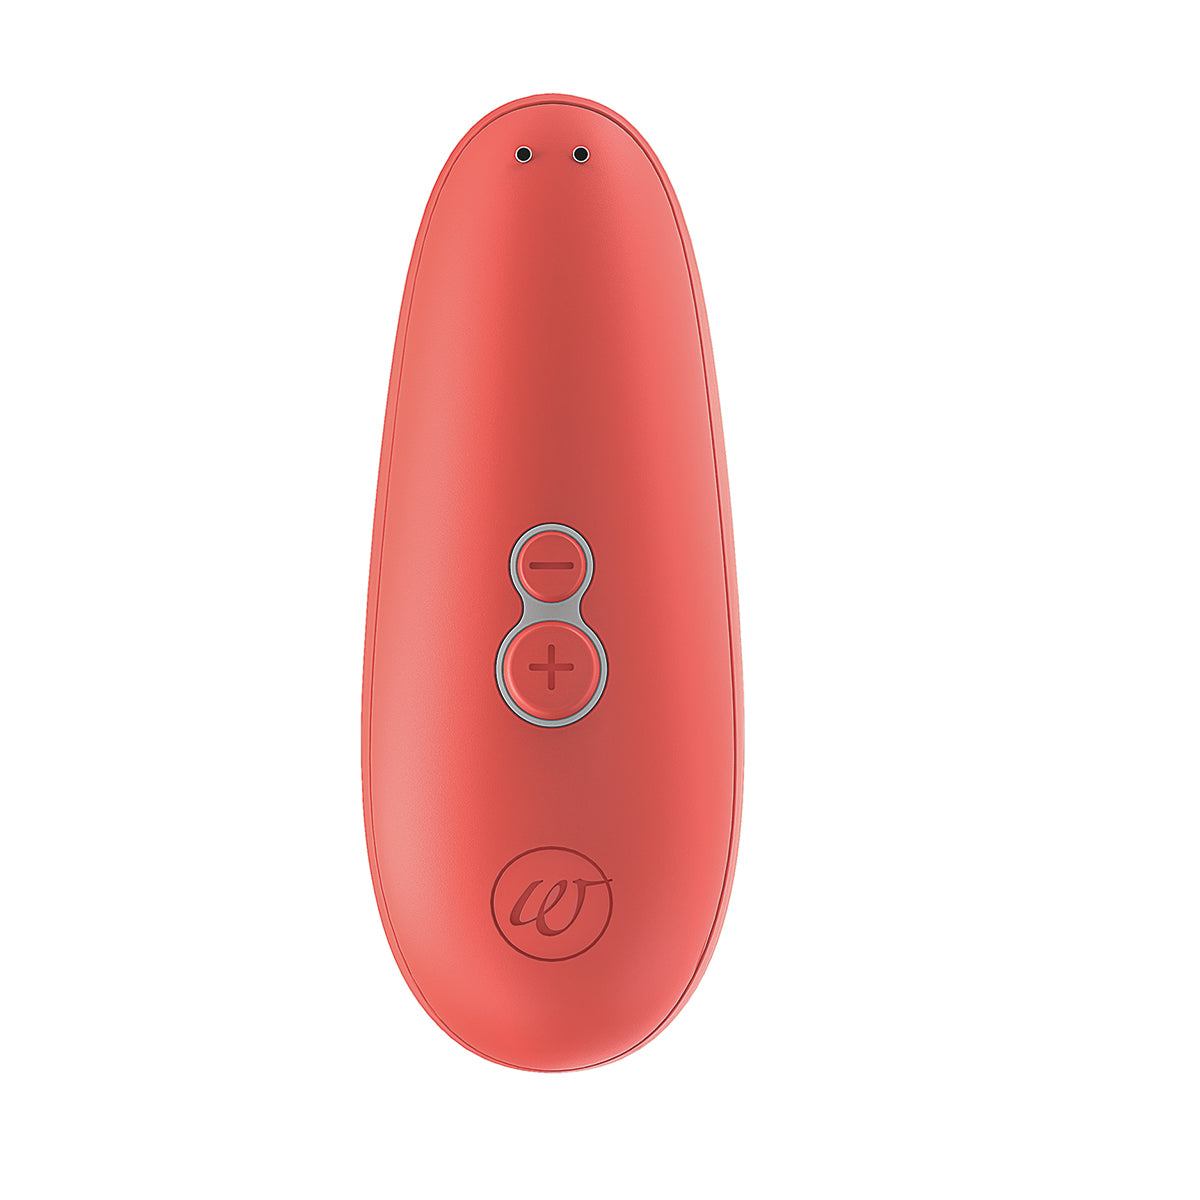 Womanizer Starlet 2 - Coral